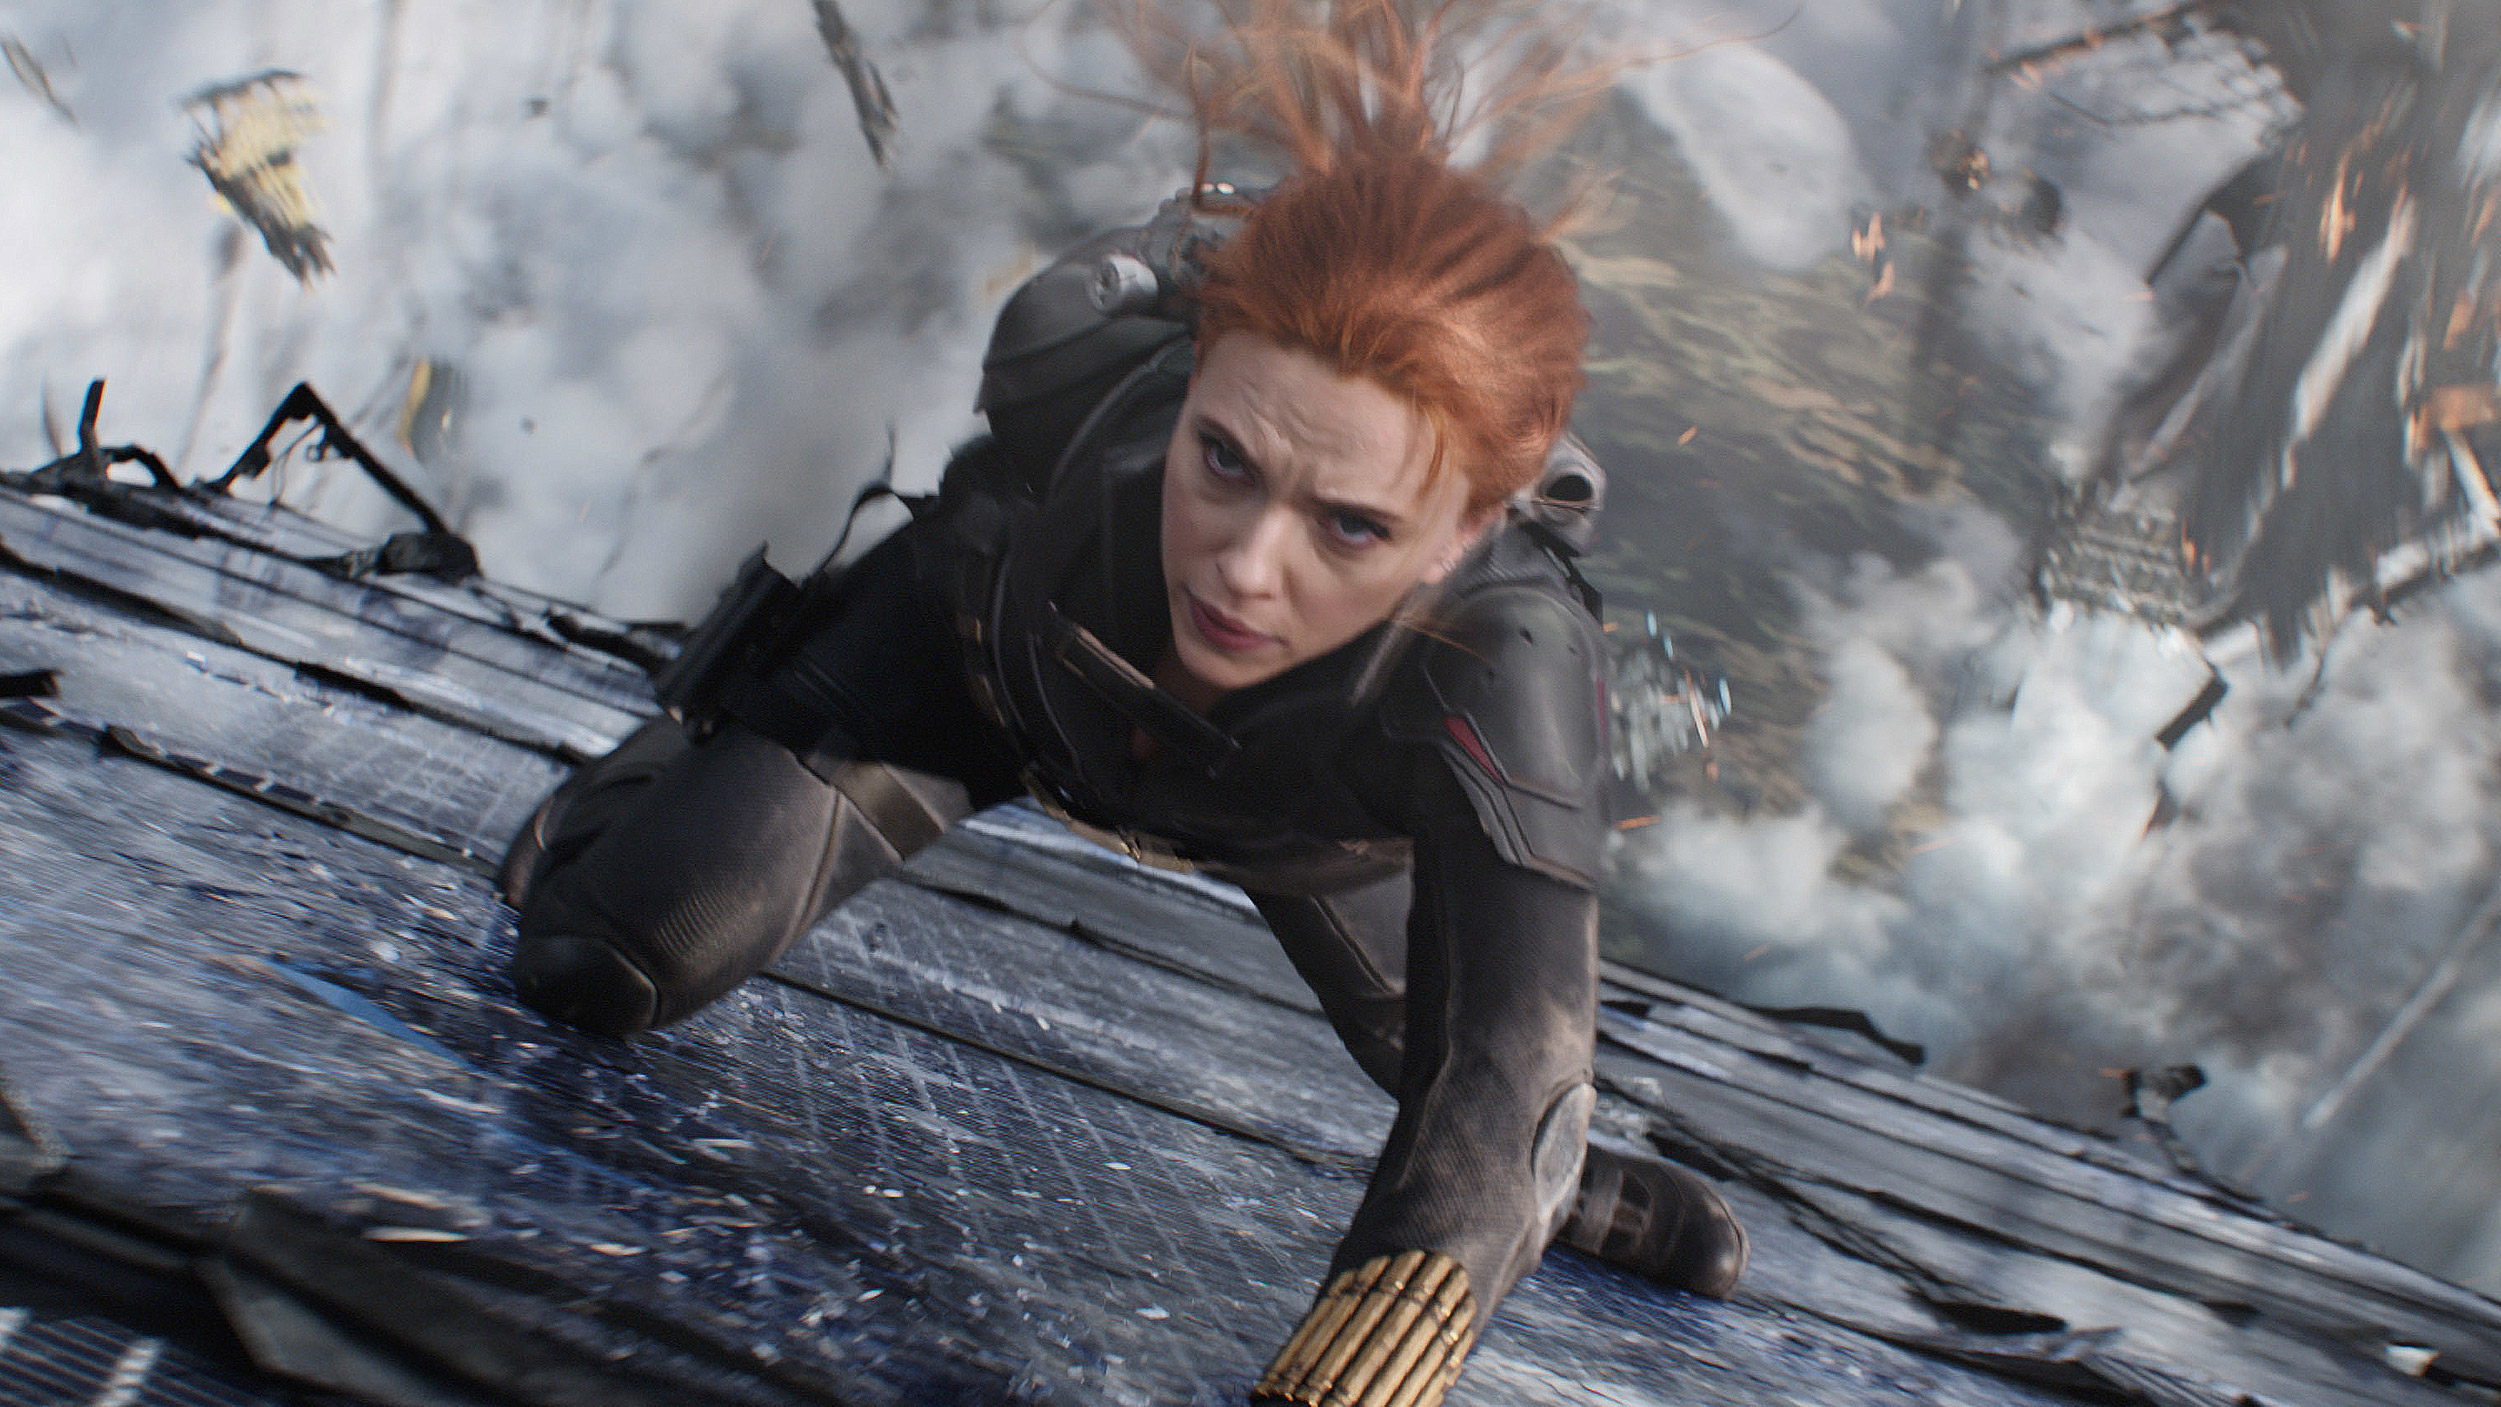 Action sequence from "Black Widow"